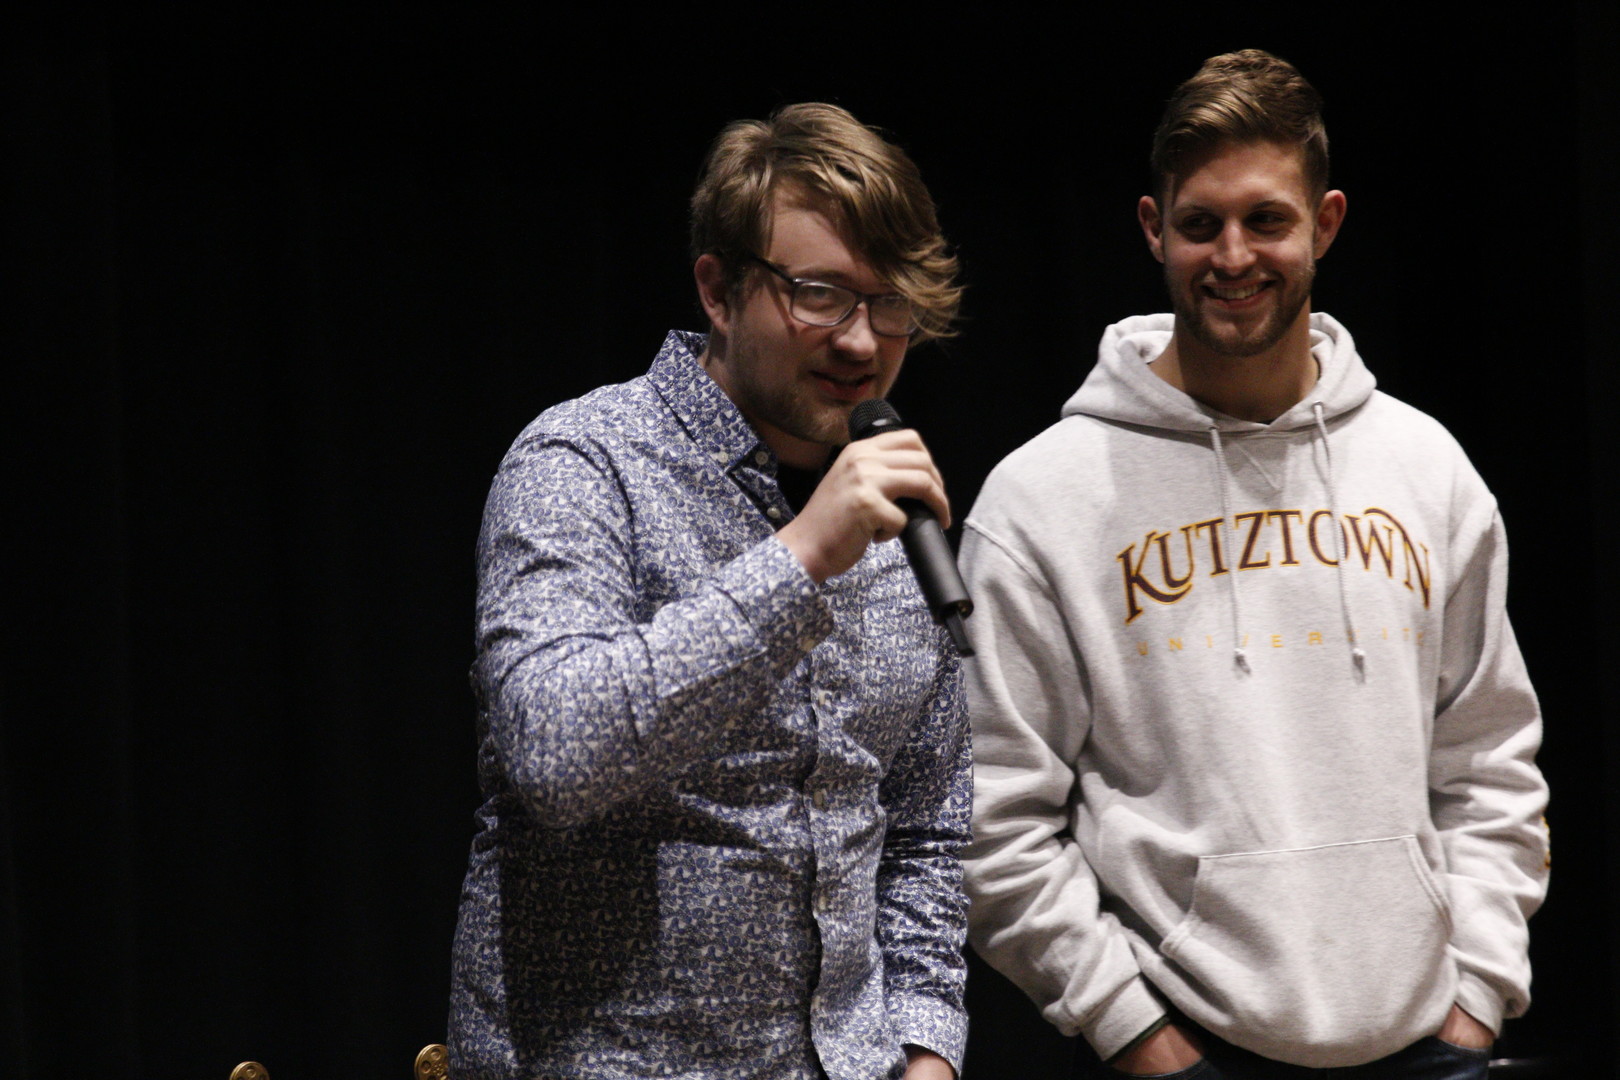 CTM student and KUFF participant Cole Reece answers questions